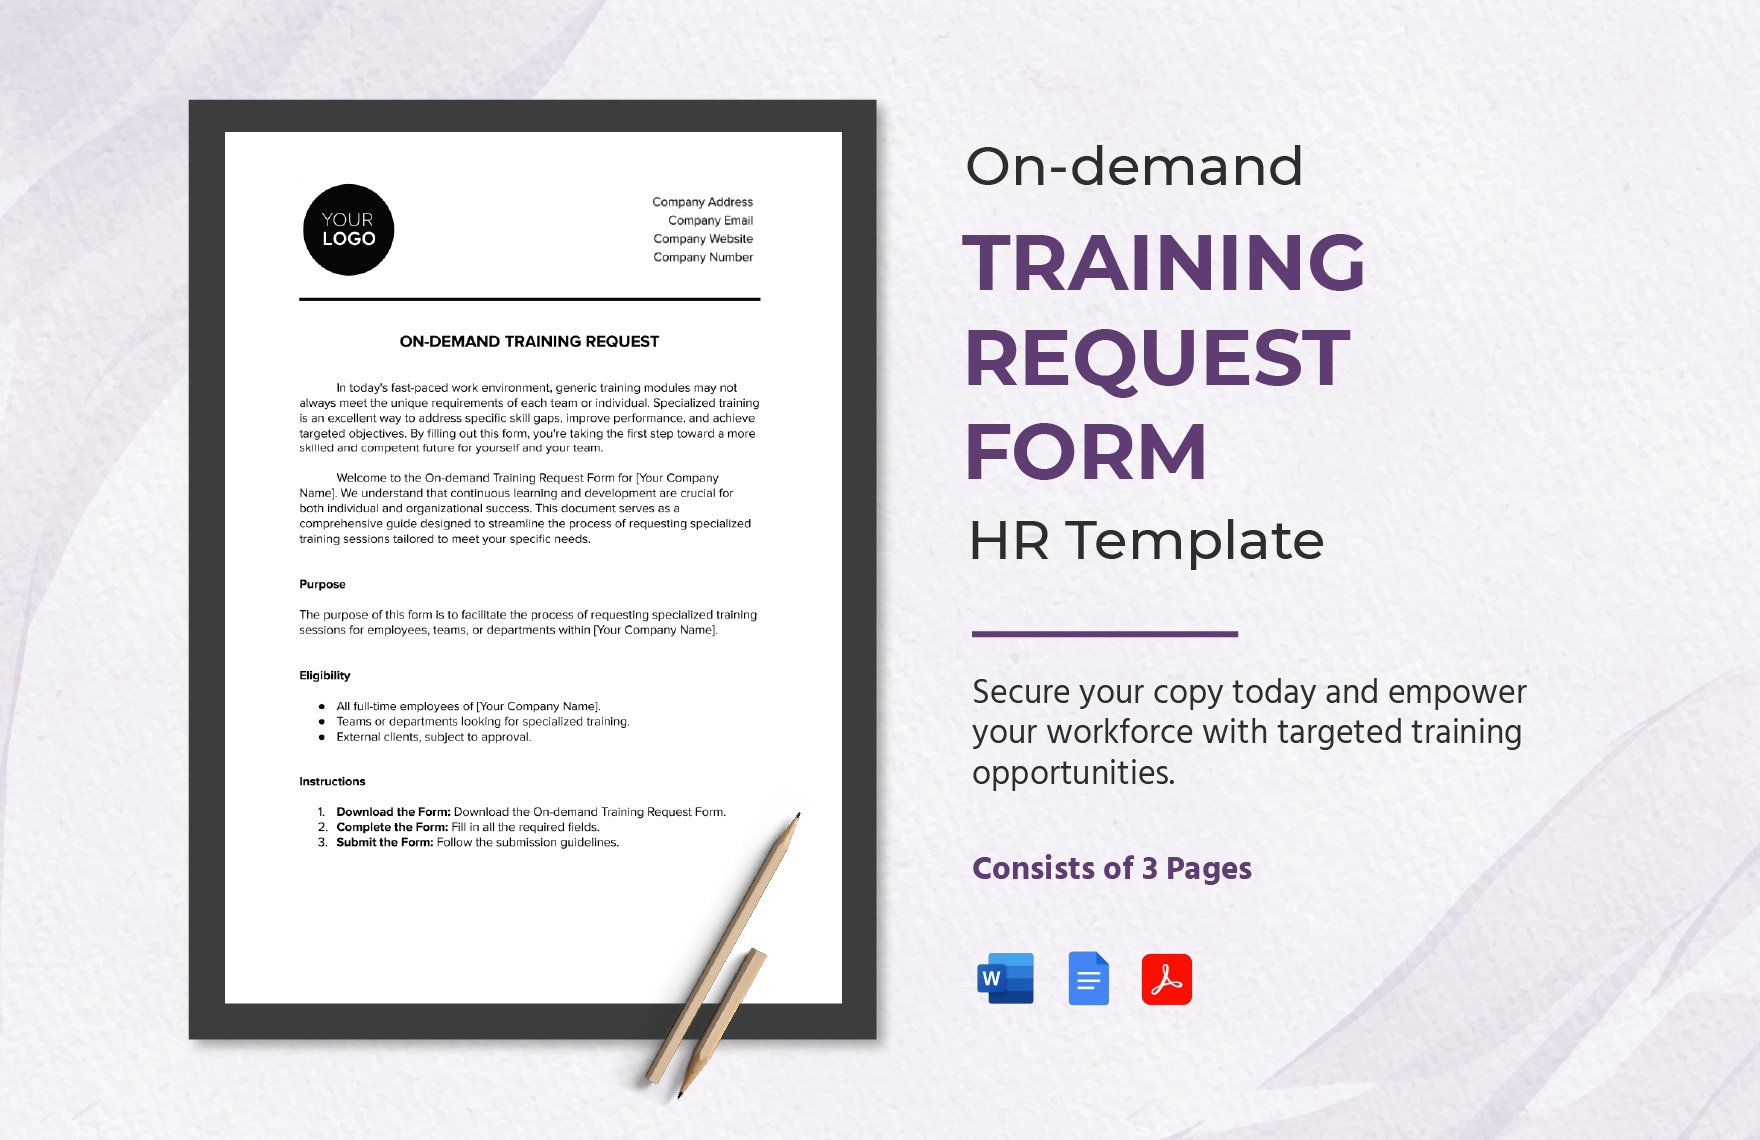 On-demand Training Request Form HR Template